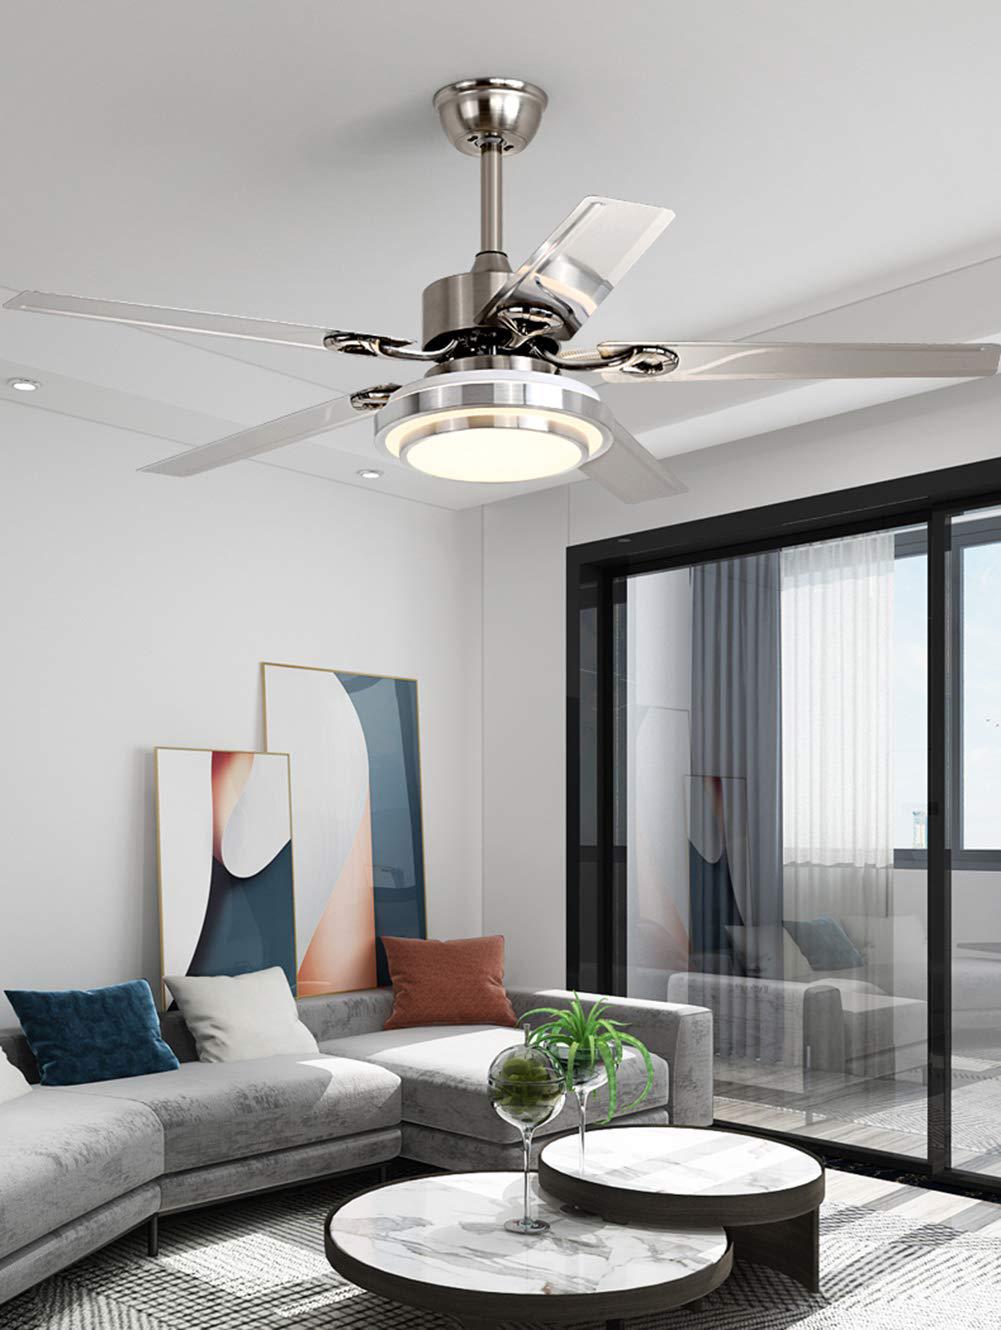 fandian 48" modern ceiling fans with lights remote control reversible fan, stainless steel blades, 3 speeds and 3 color chang